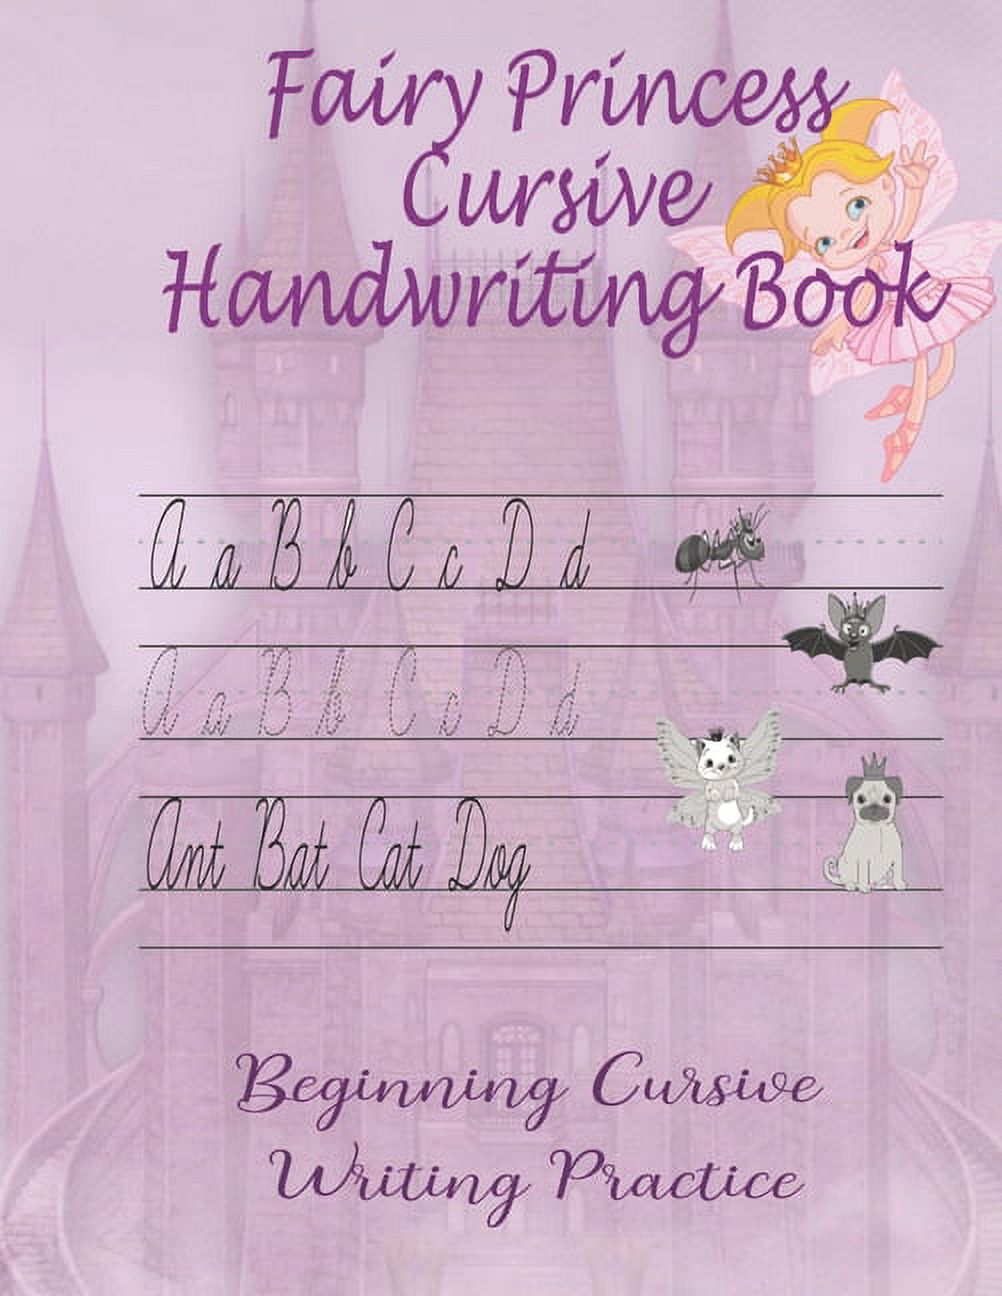 Fairy Princess Cursive Handwriting Book: Beginners Workbook For Kids Learning How To Correctly Write The Cursive Alphabet. By Including Fun Exercises, Learning Becomes Easier And A Memorable Experience. 74 Pages Of Fun. 8.5 X 11 Is A Great Size For Kids [Book]